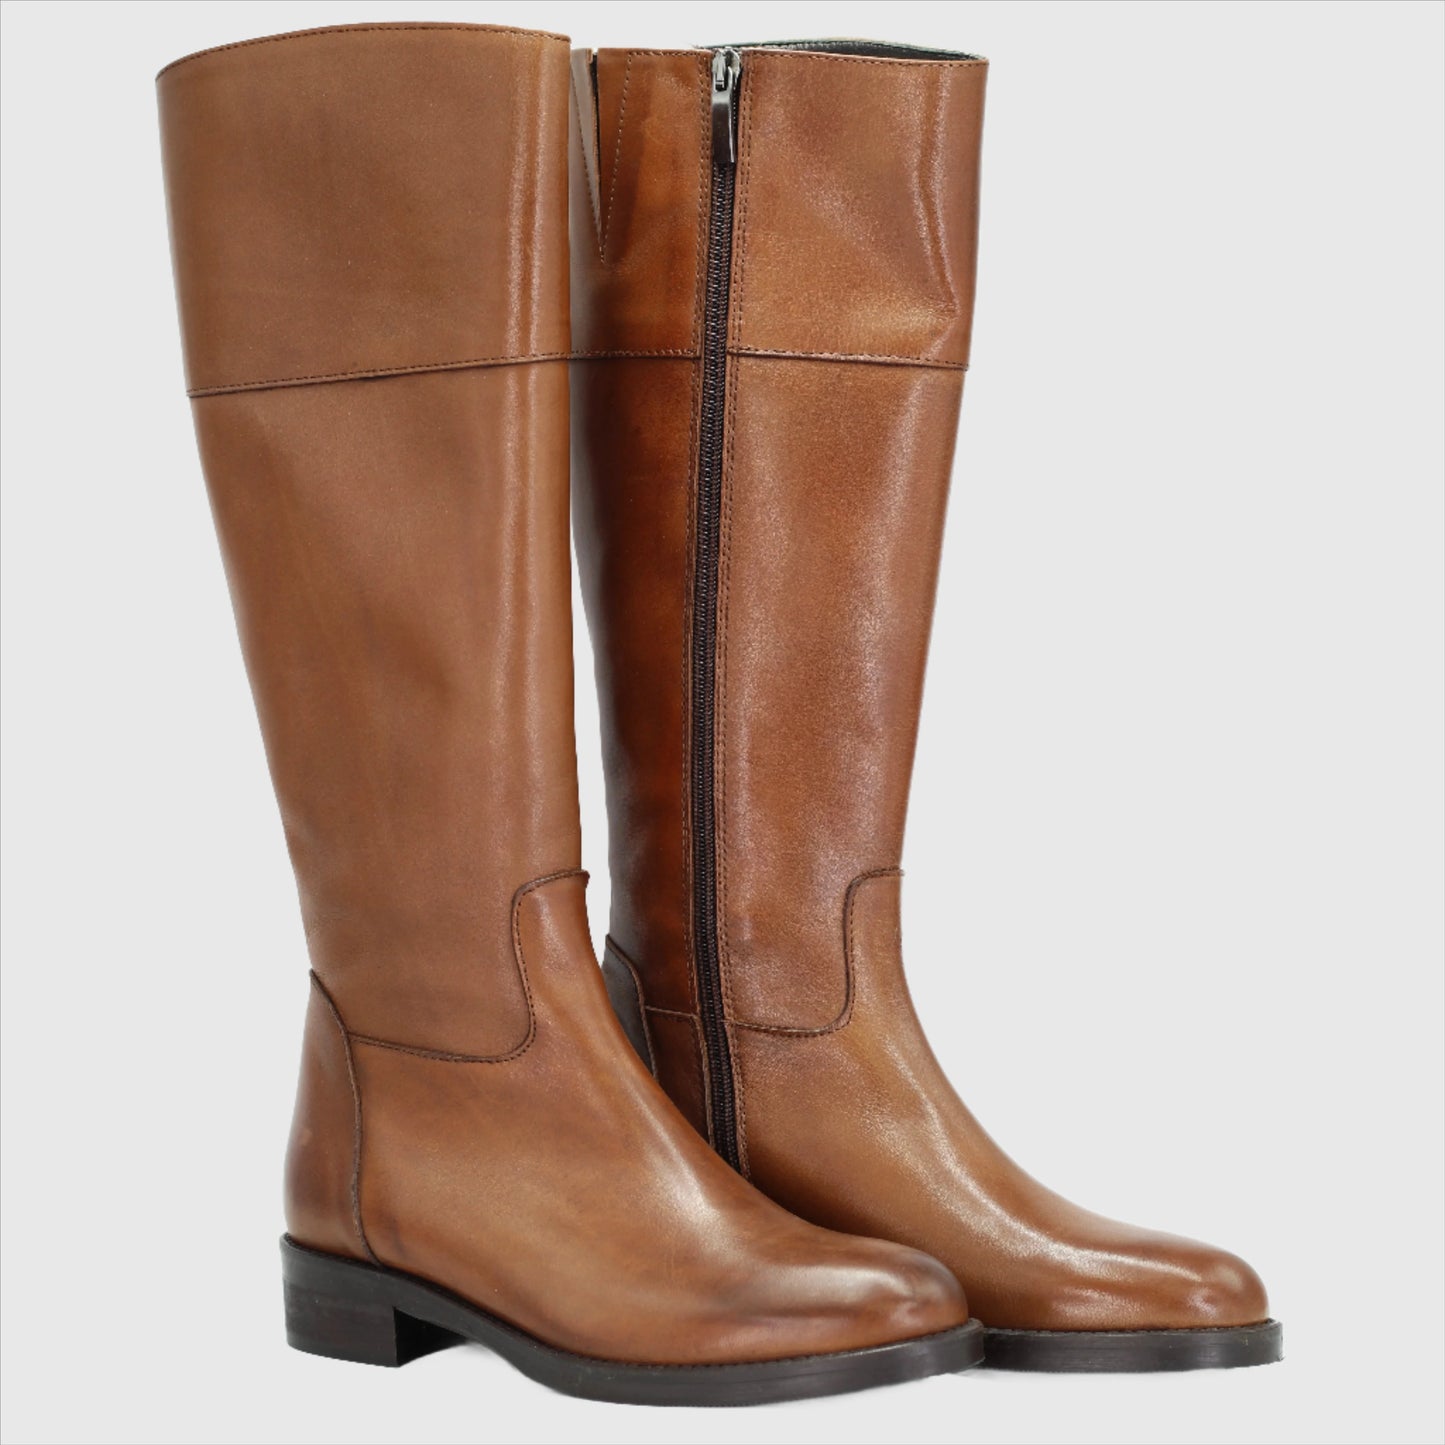 Shop Handmade Italian Leather equestrian boot in tabacco (GC5904) or browse our range of hand-made Italian shoes in leather or suede in-store at Aliverti Cape Town, or shop online. We deliver in South Africa & offer multiple payment plans as well as accept multiple safe & secure payment methods.